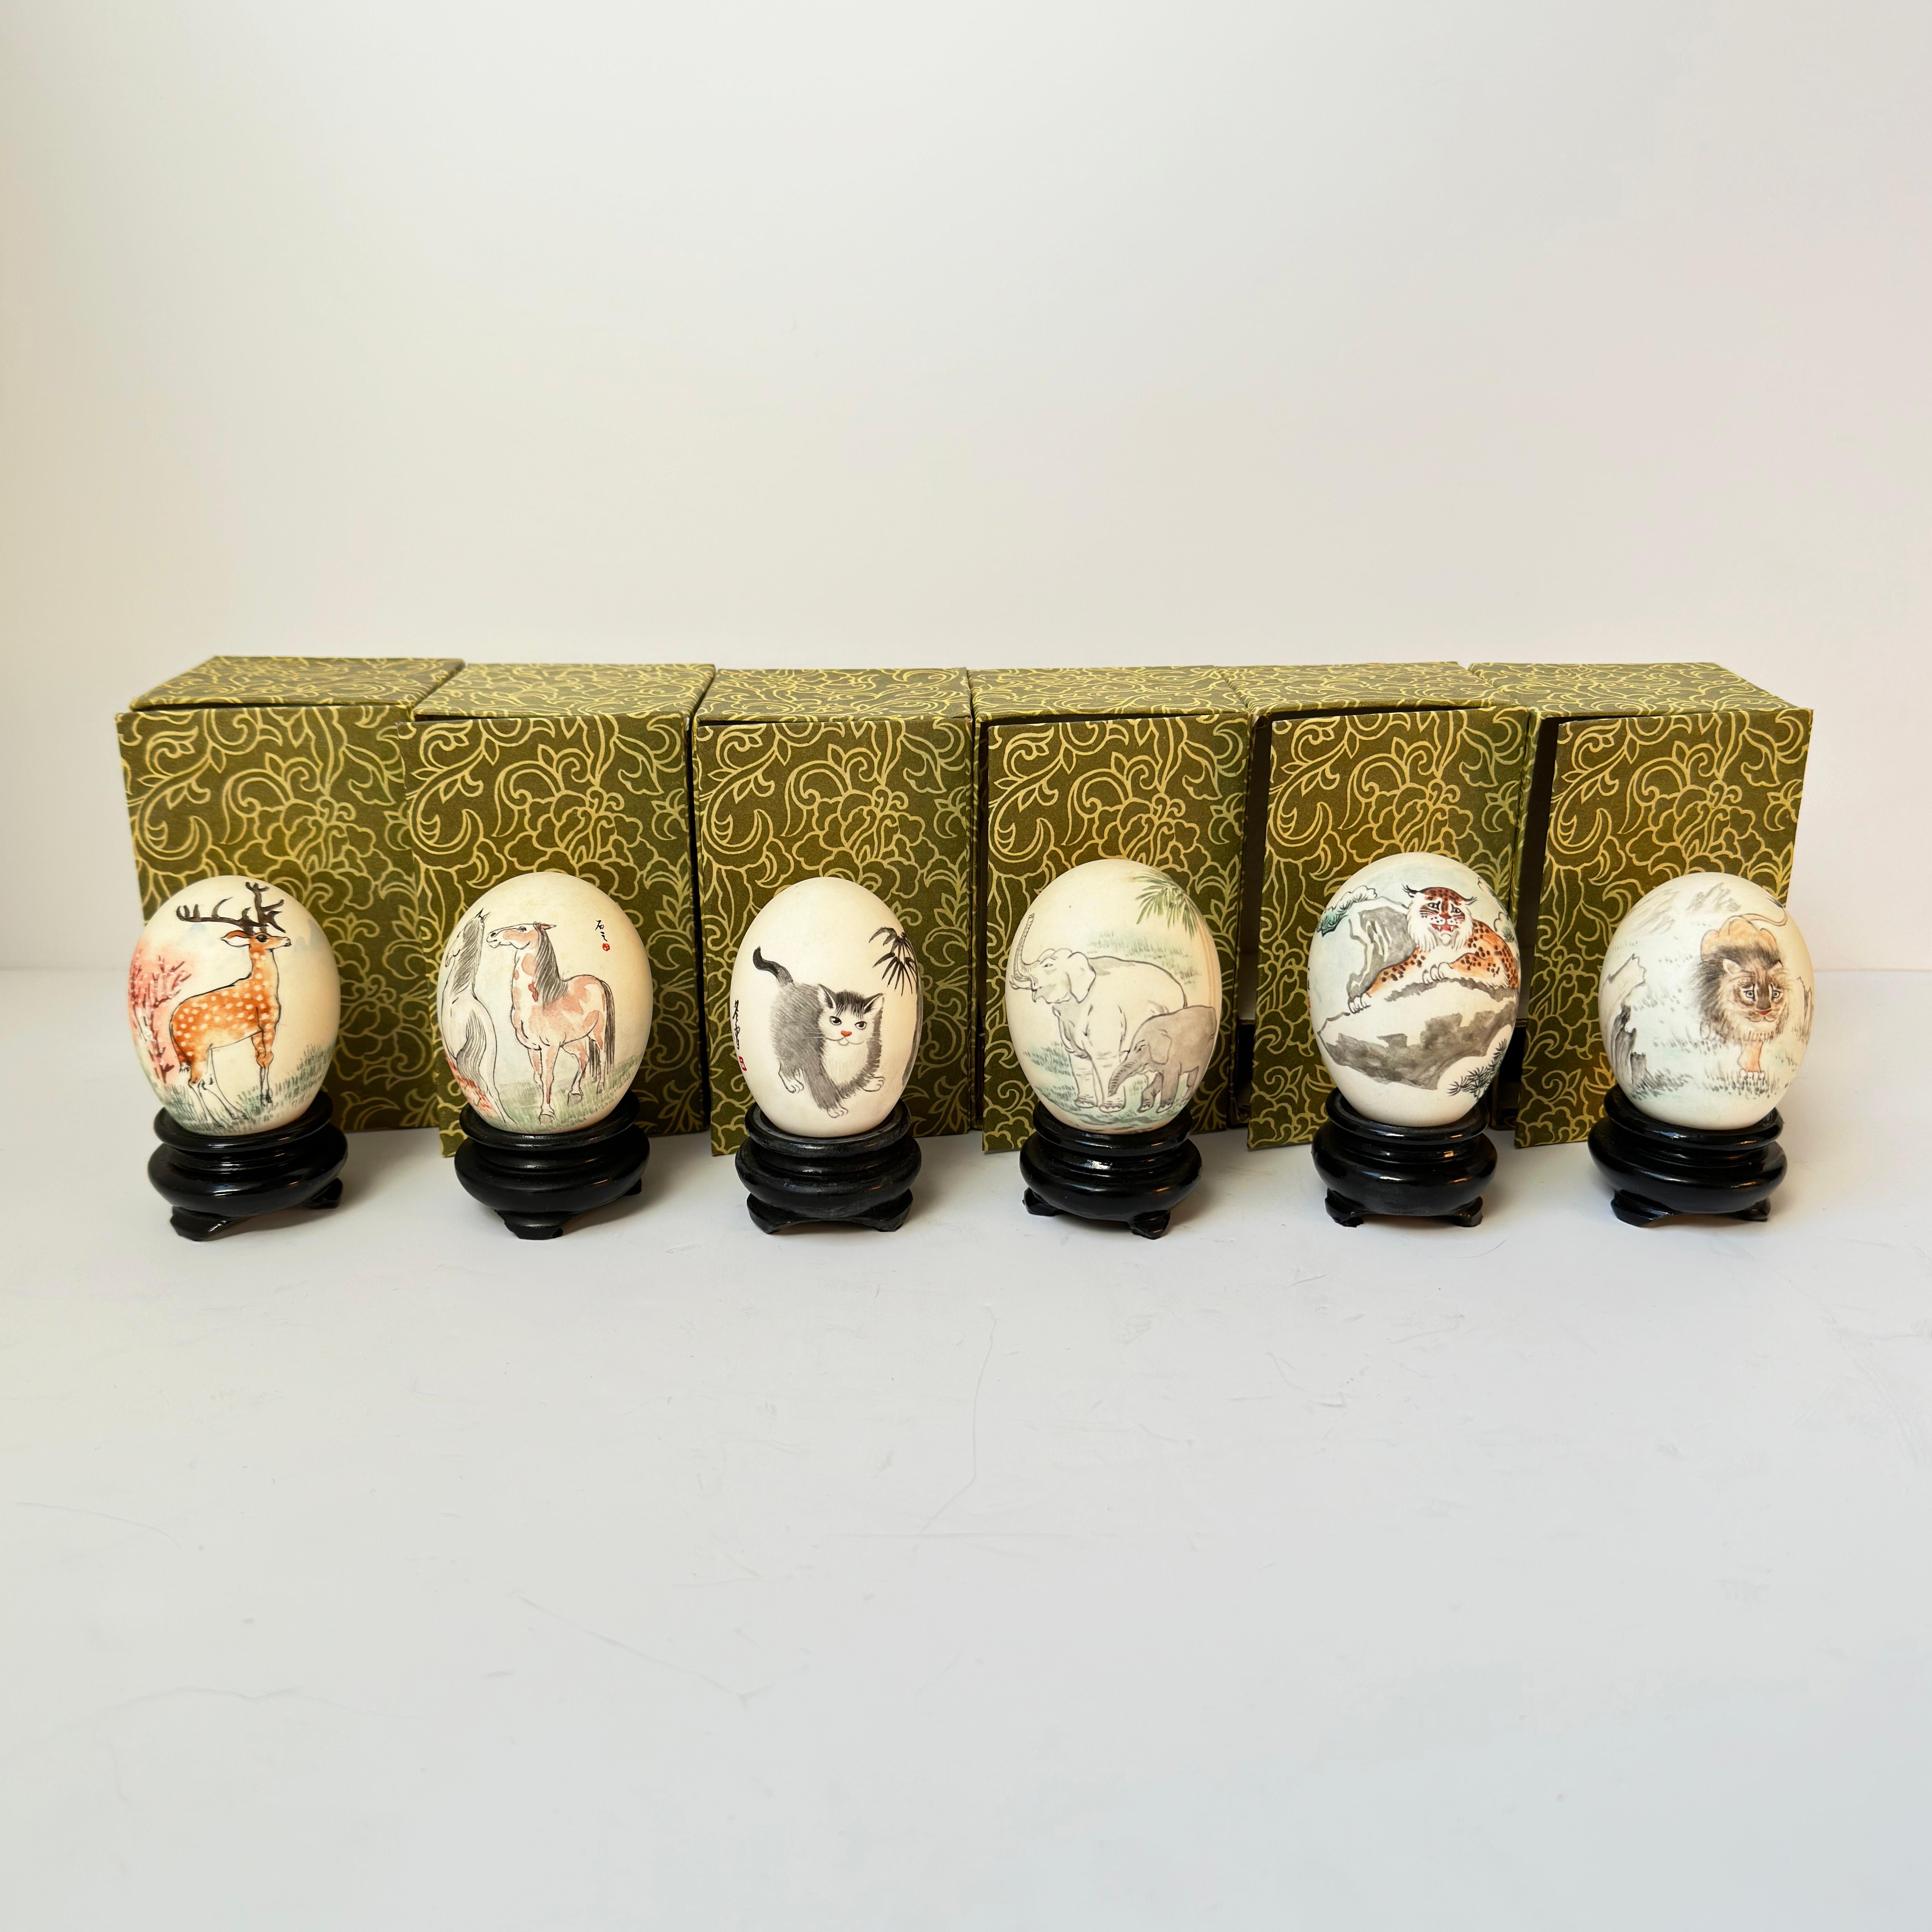 Vintage Chinese Painted Eggshells on Wooden Display Plinths - Set of 6 In Good Condition For Sale In Glasgow, GB